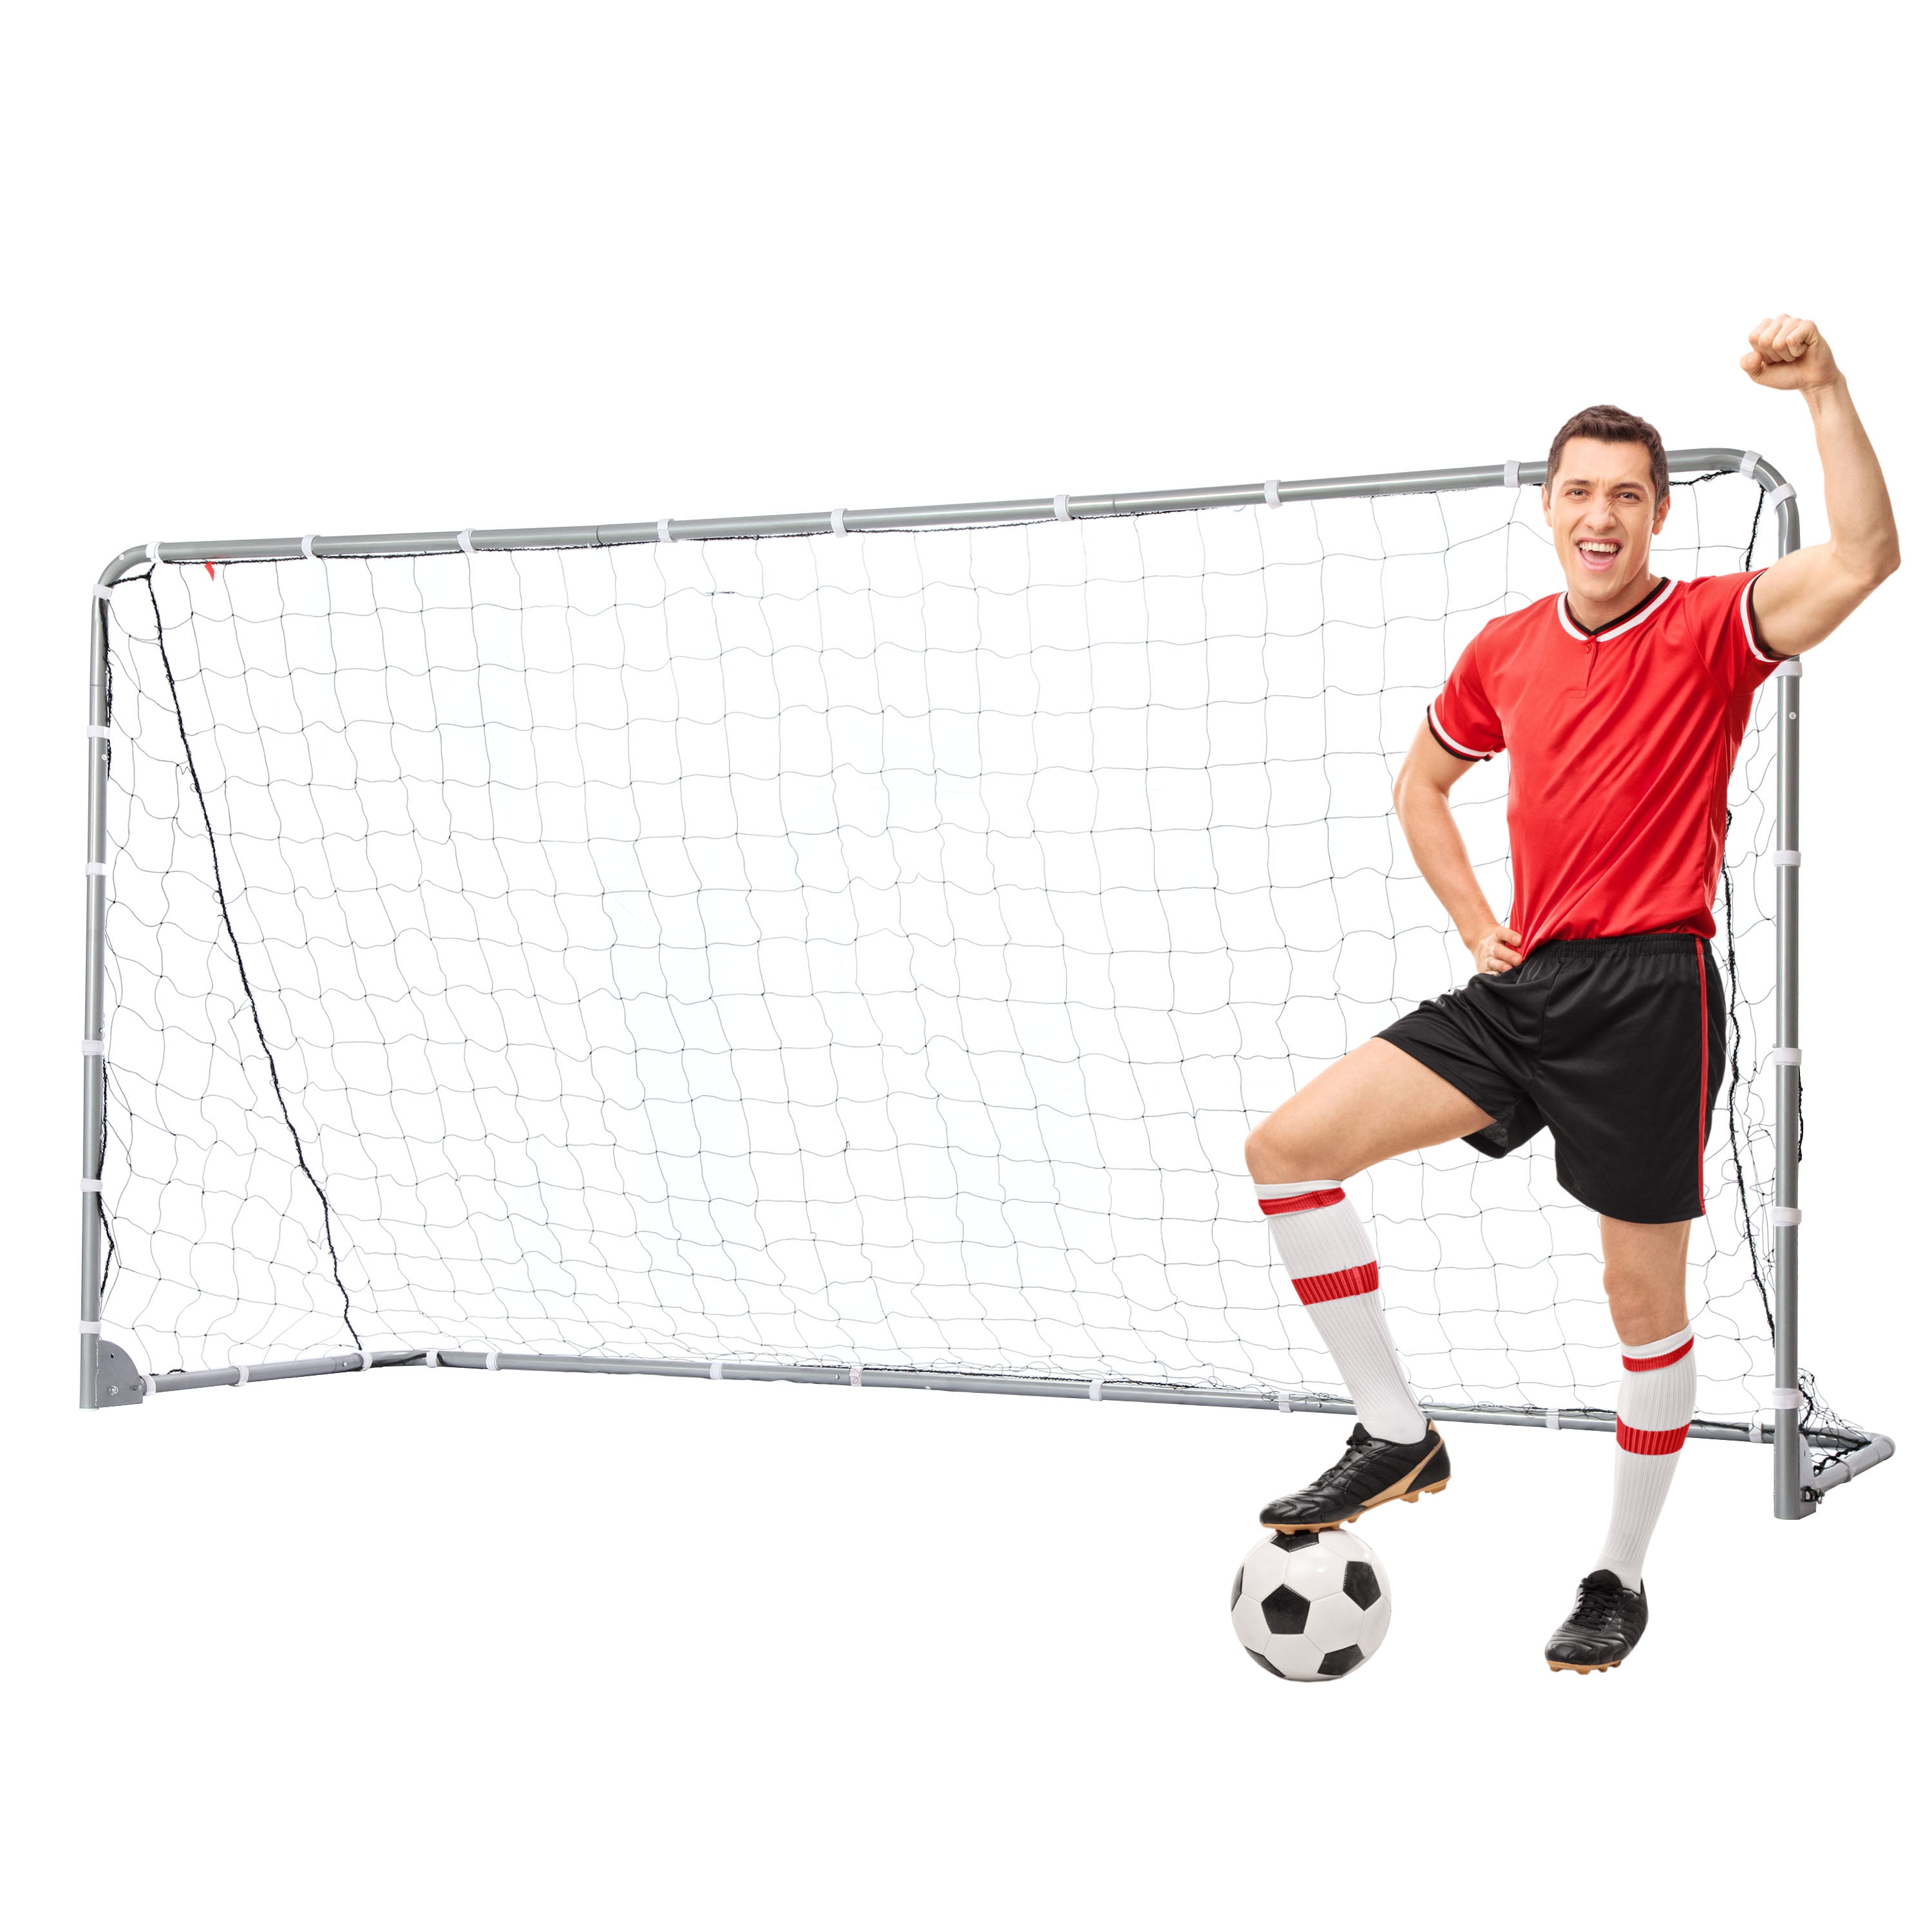 E-Jet Soccer Goals Metal Football Goals Quick Folding & Easy Storage Outdoor Training Nets Sliver Large Size 12' x 6' Backyard Practice 